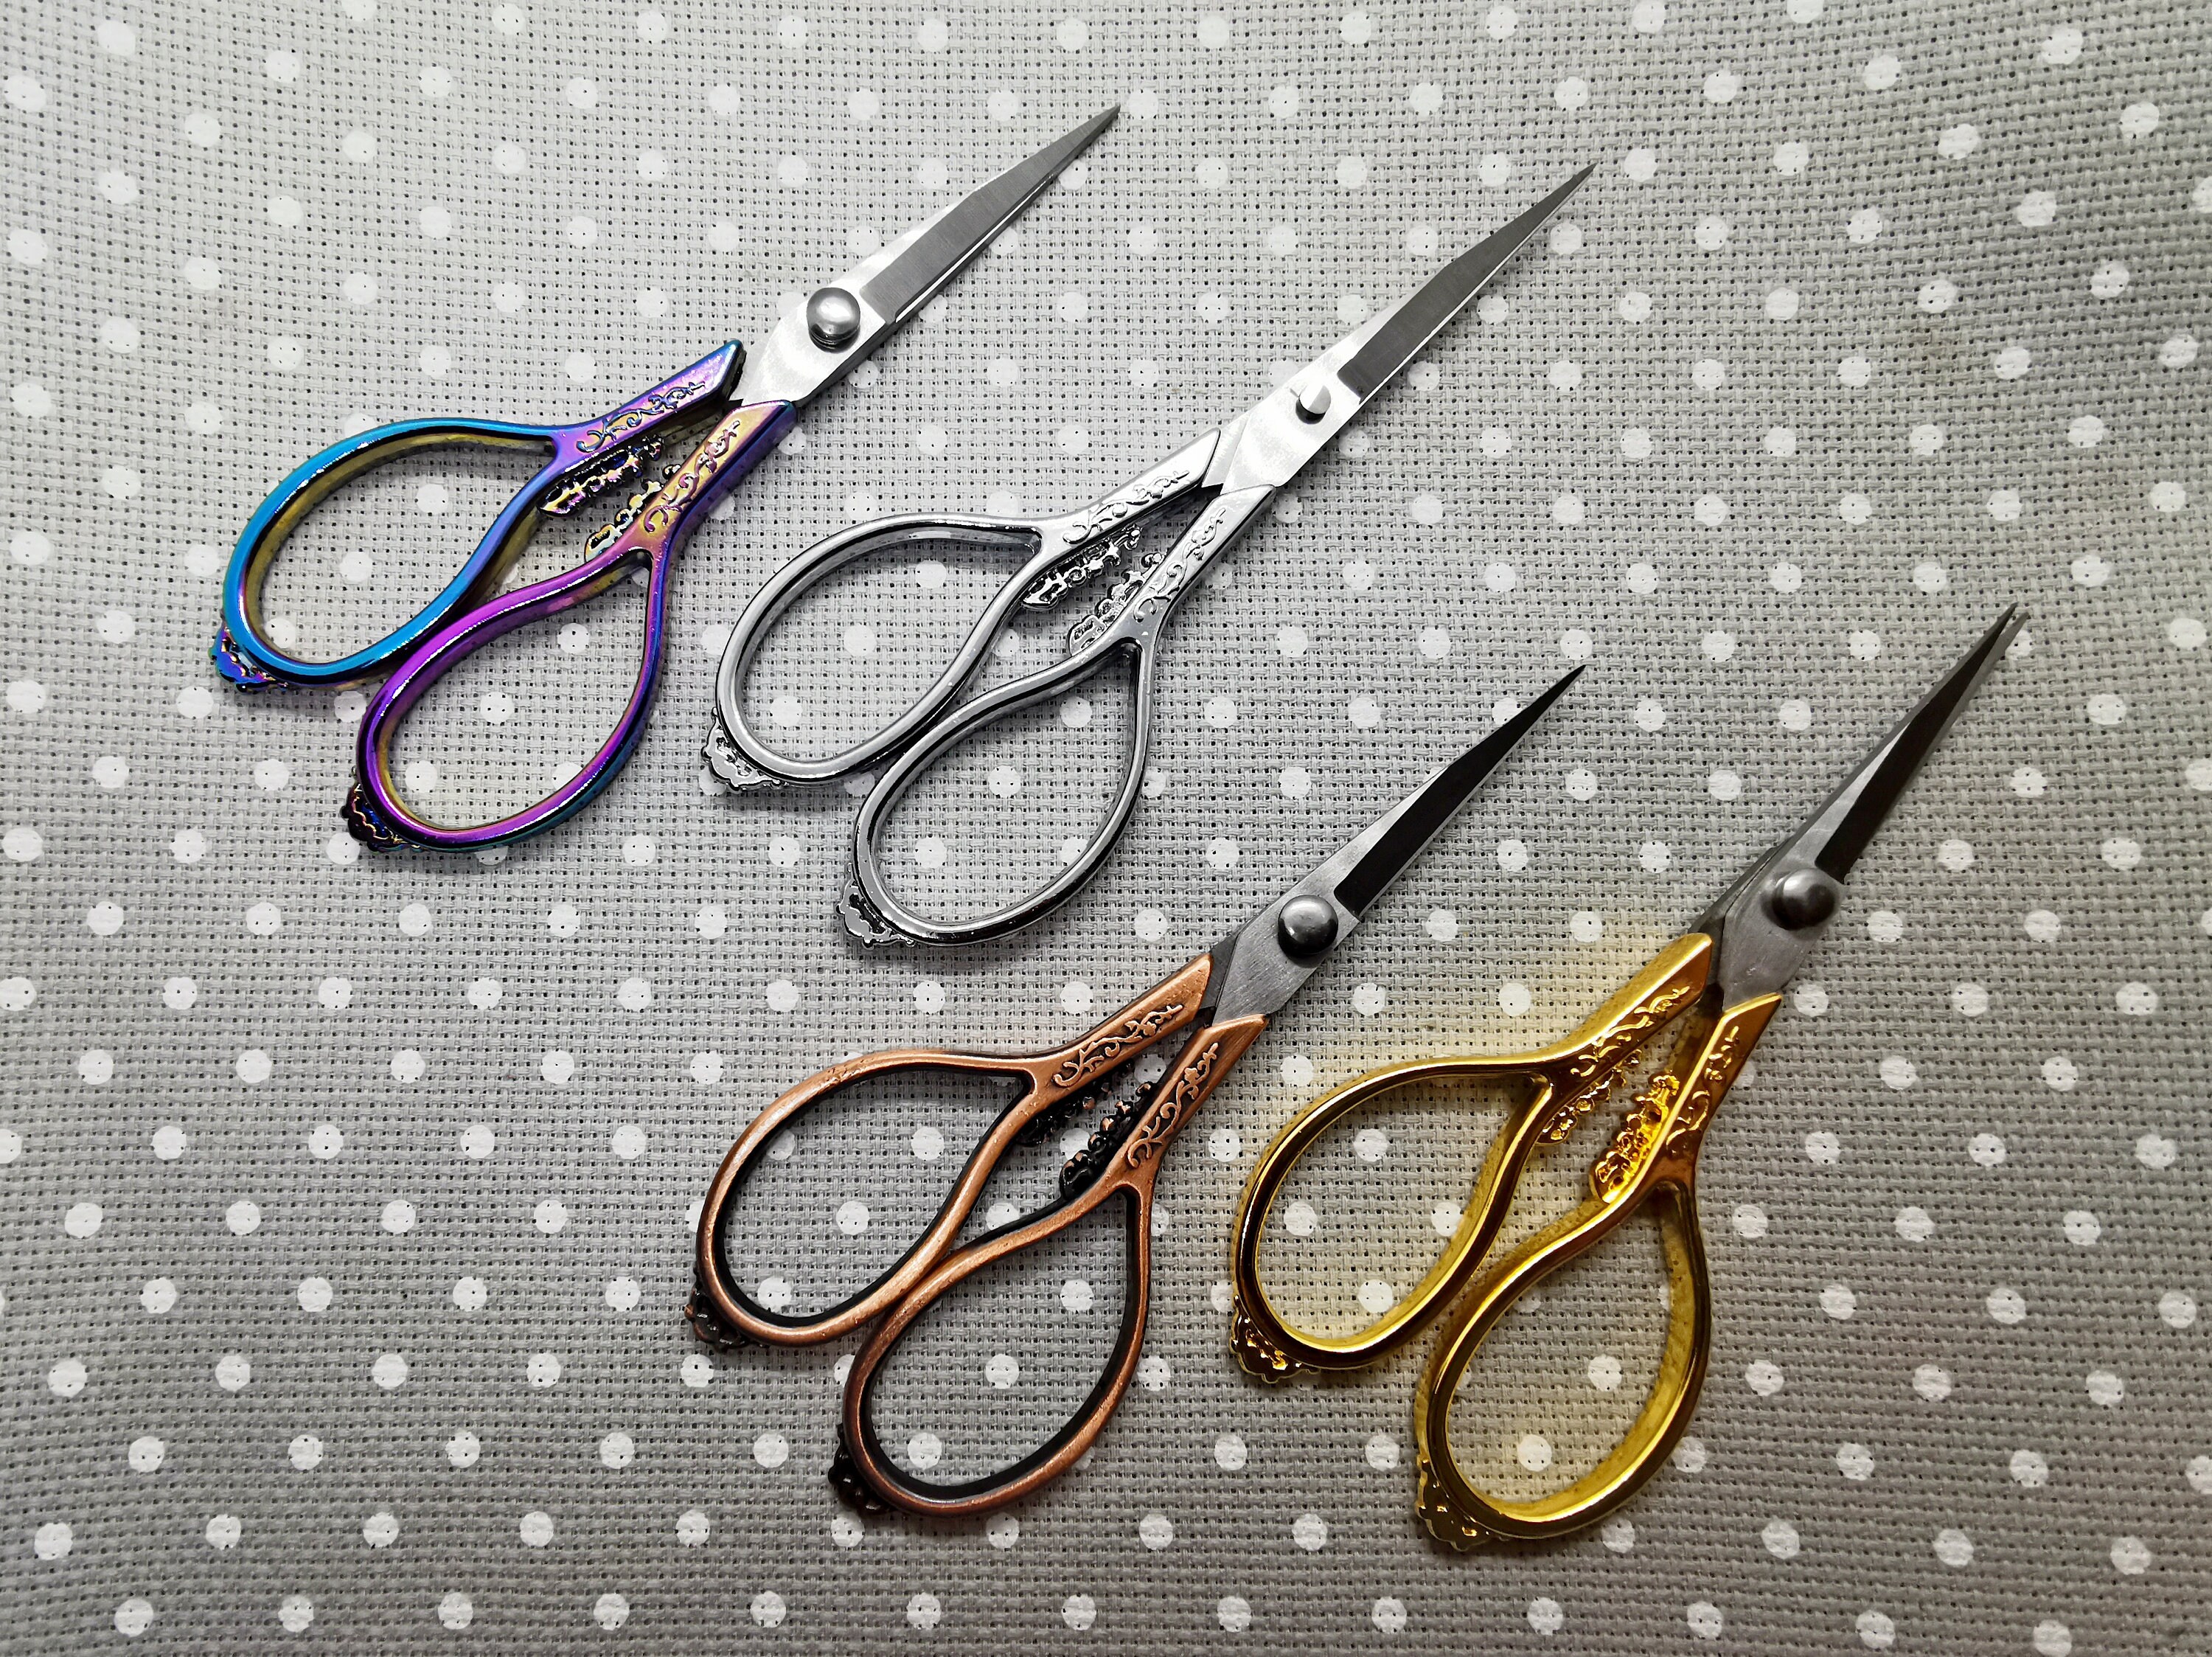  Scissors Trim Embroidery Small Portable Stainless Steel  Materials Pocket Shears Little Needlework Cutters Sewing Petite Miniature Tiny  Scissors (Silver Black) : Arts, Crafts & Sewing